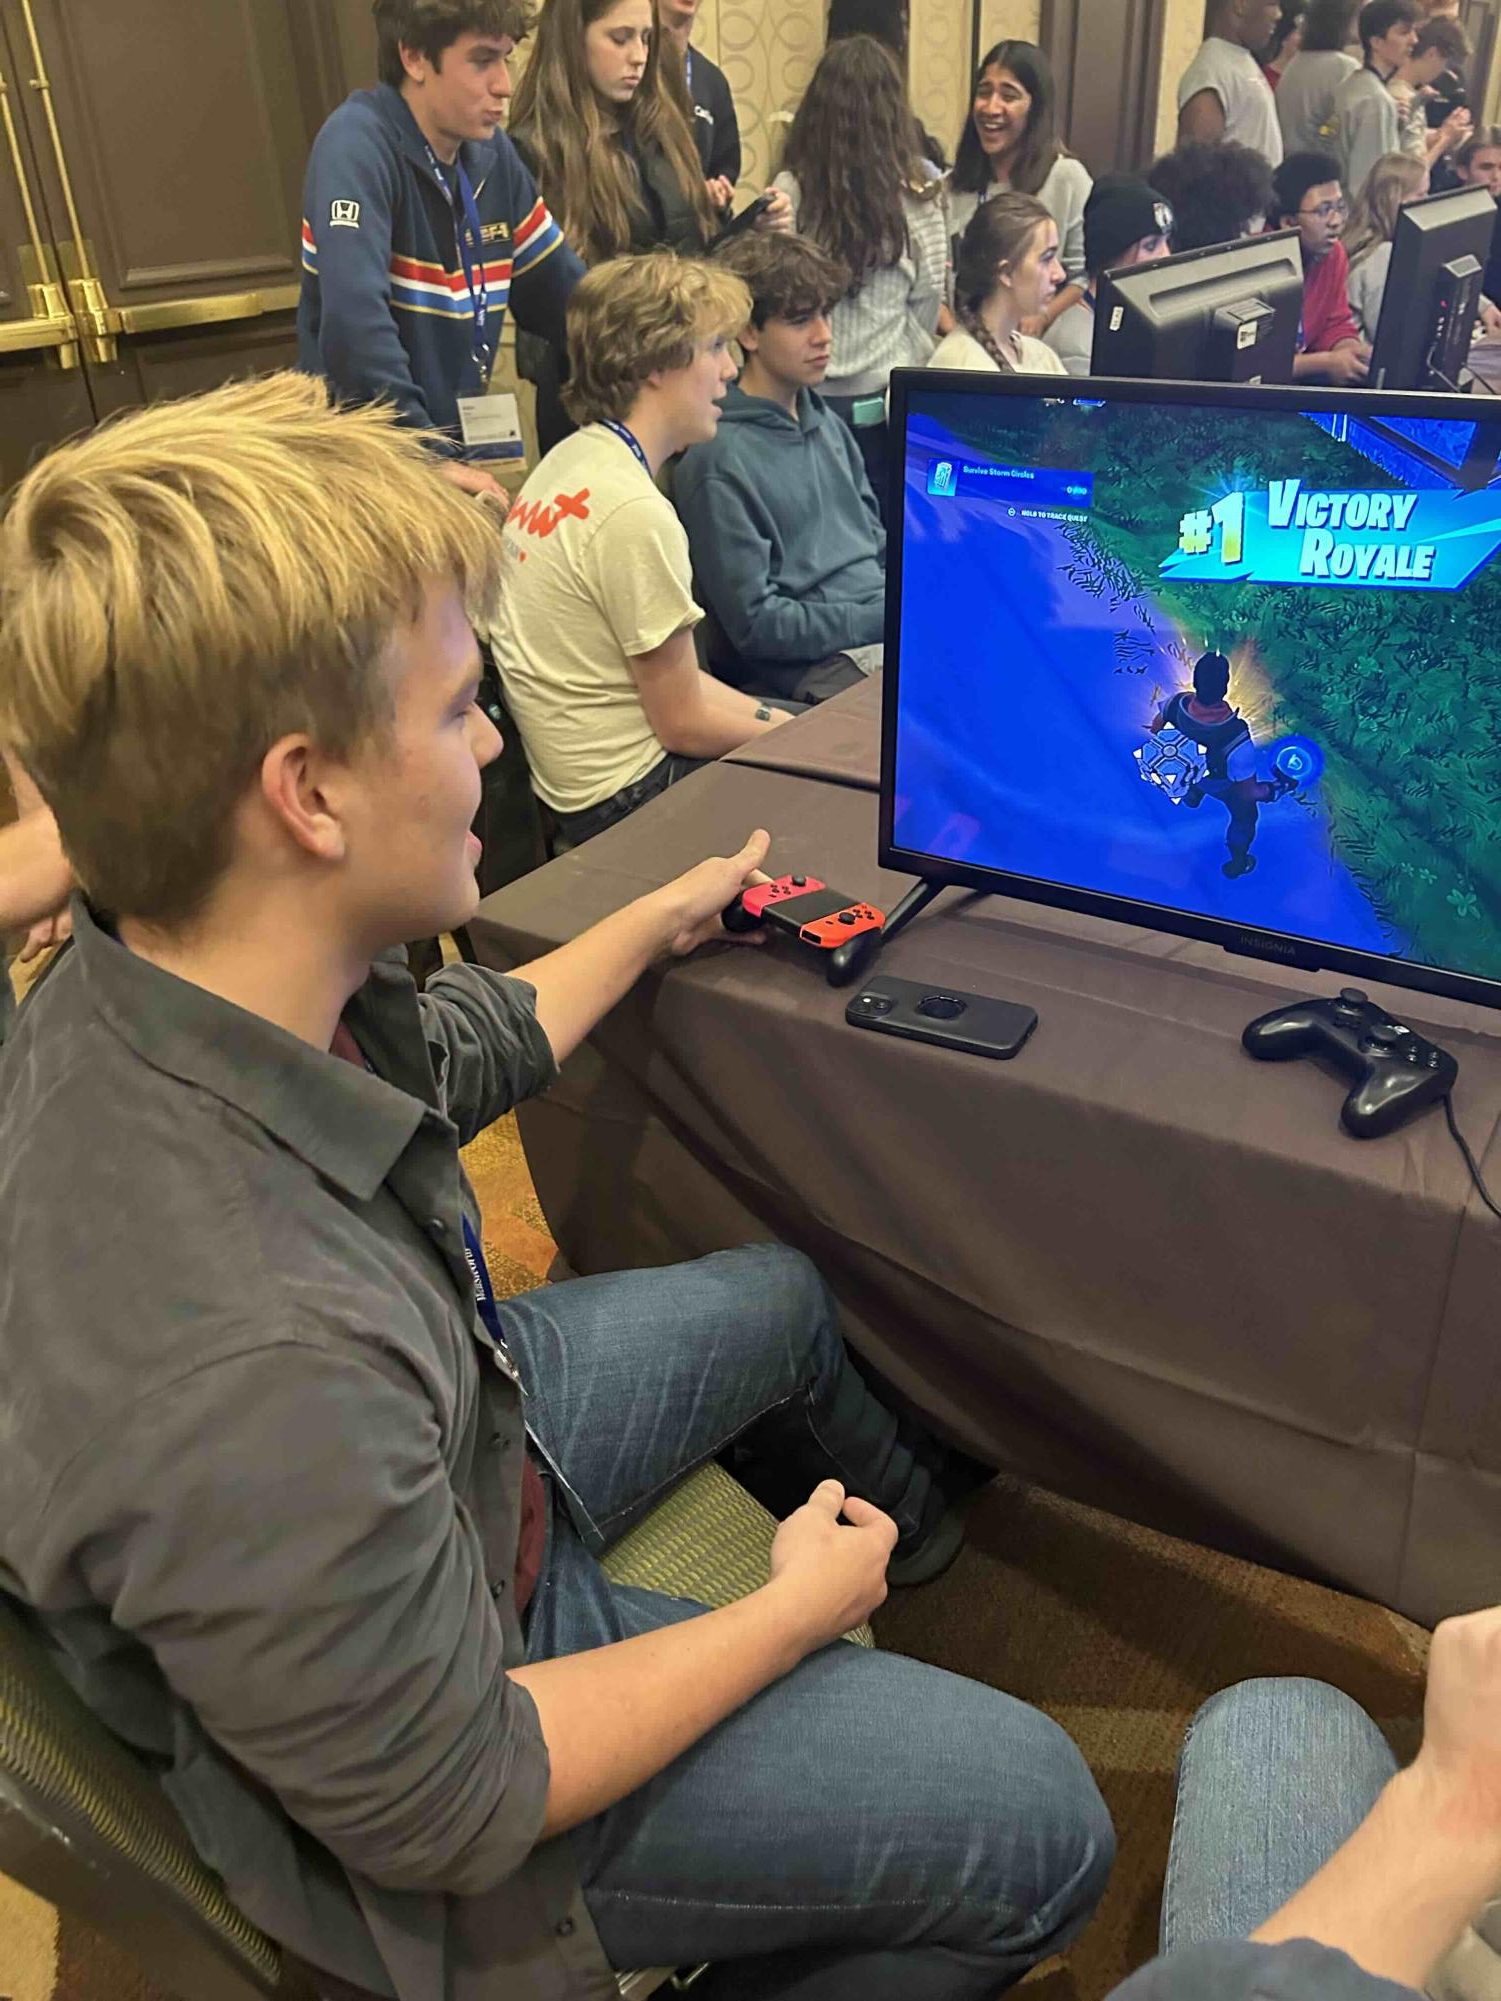 Photo of Andrew Towe achieving a victory royale at the JEA journalism convention. Photo provided by William Den Herder.